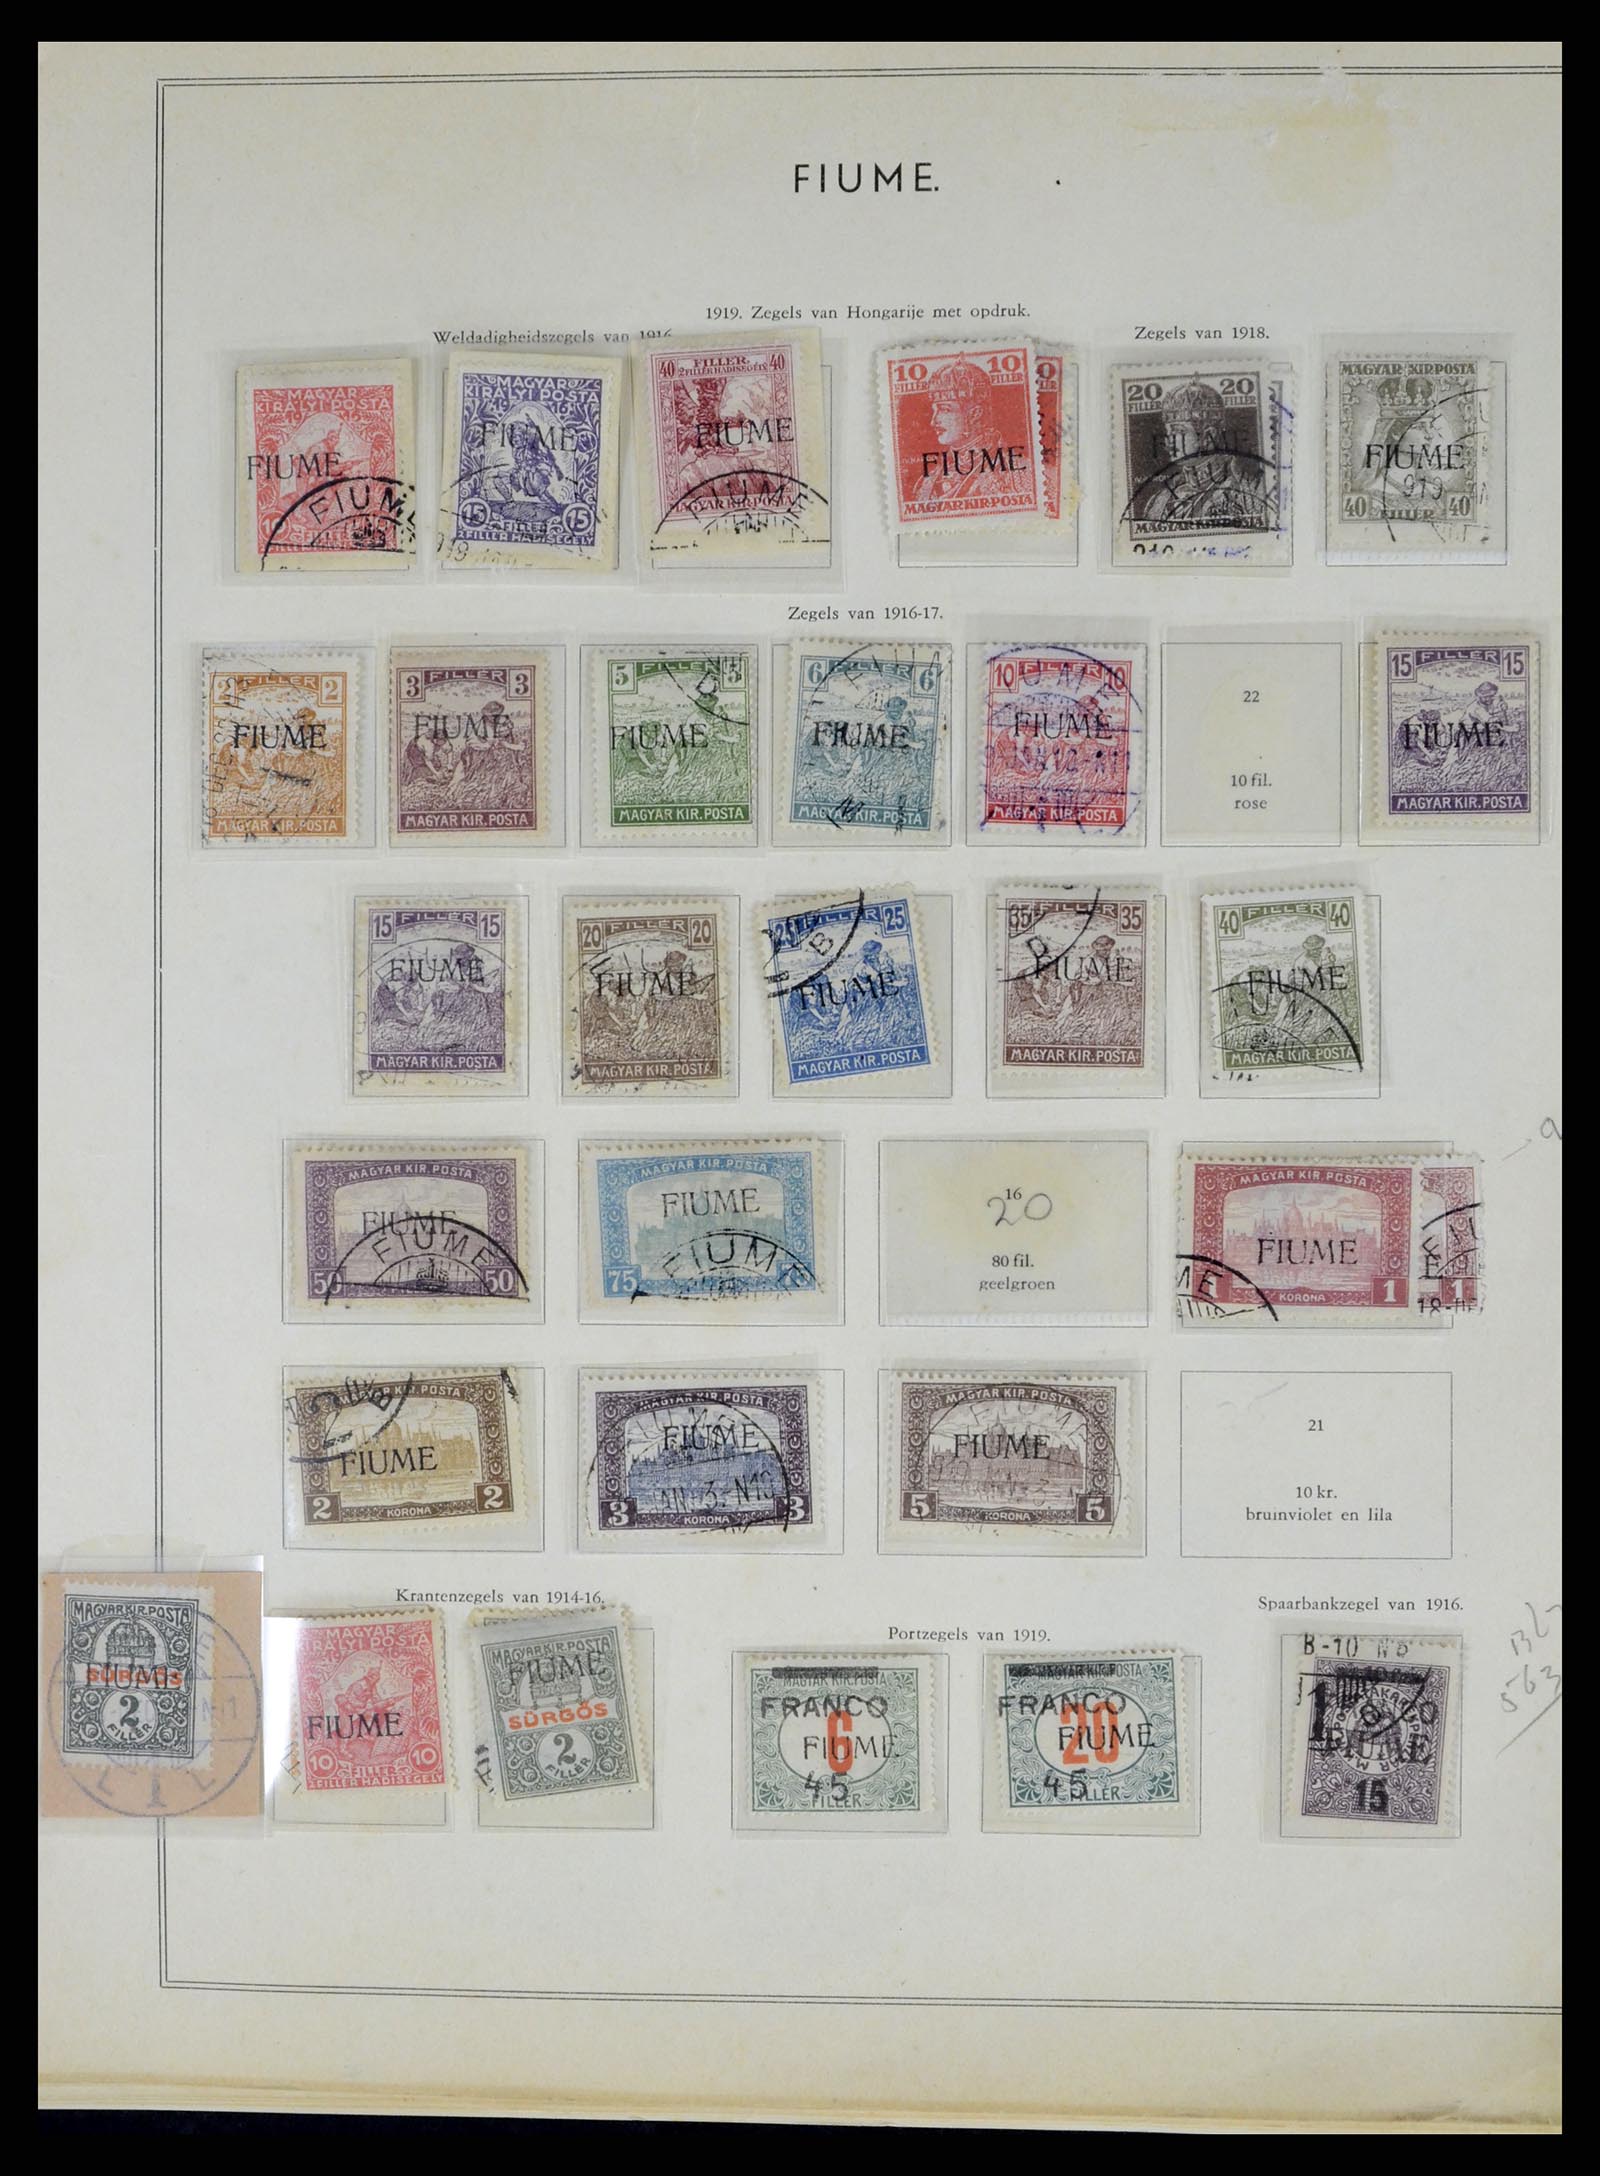 37865 019 - Stamp Collection 37865 Fiume 1920-1924.